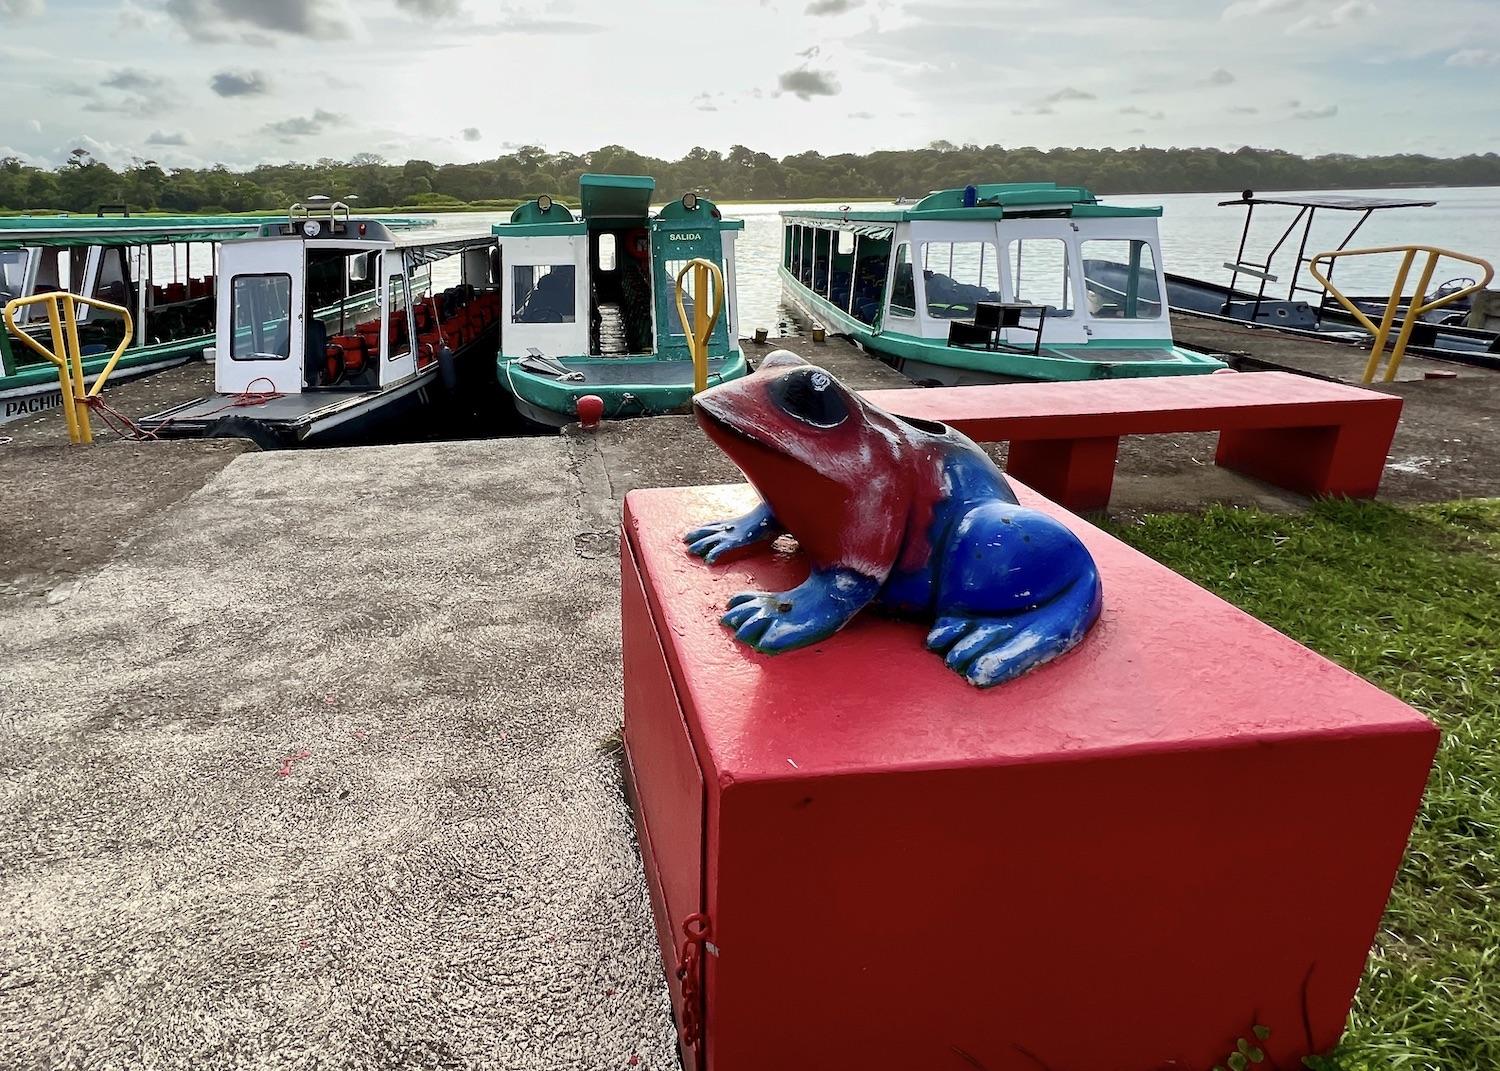 A poison dart frog statue in the village of Tortuguero, where river boats stand ready for visitors.